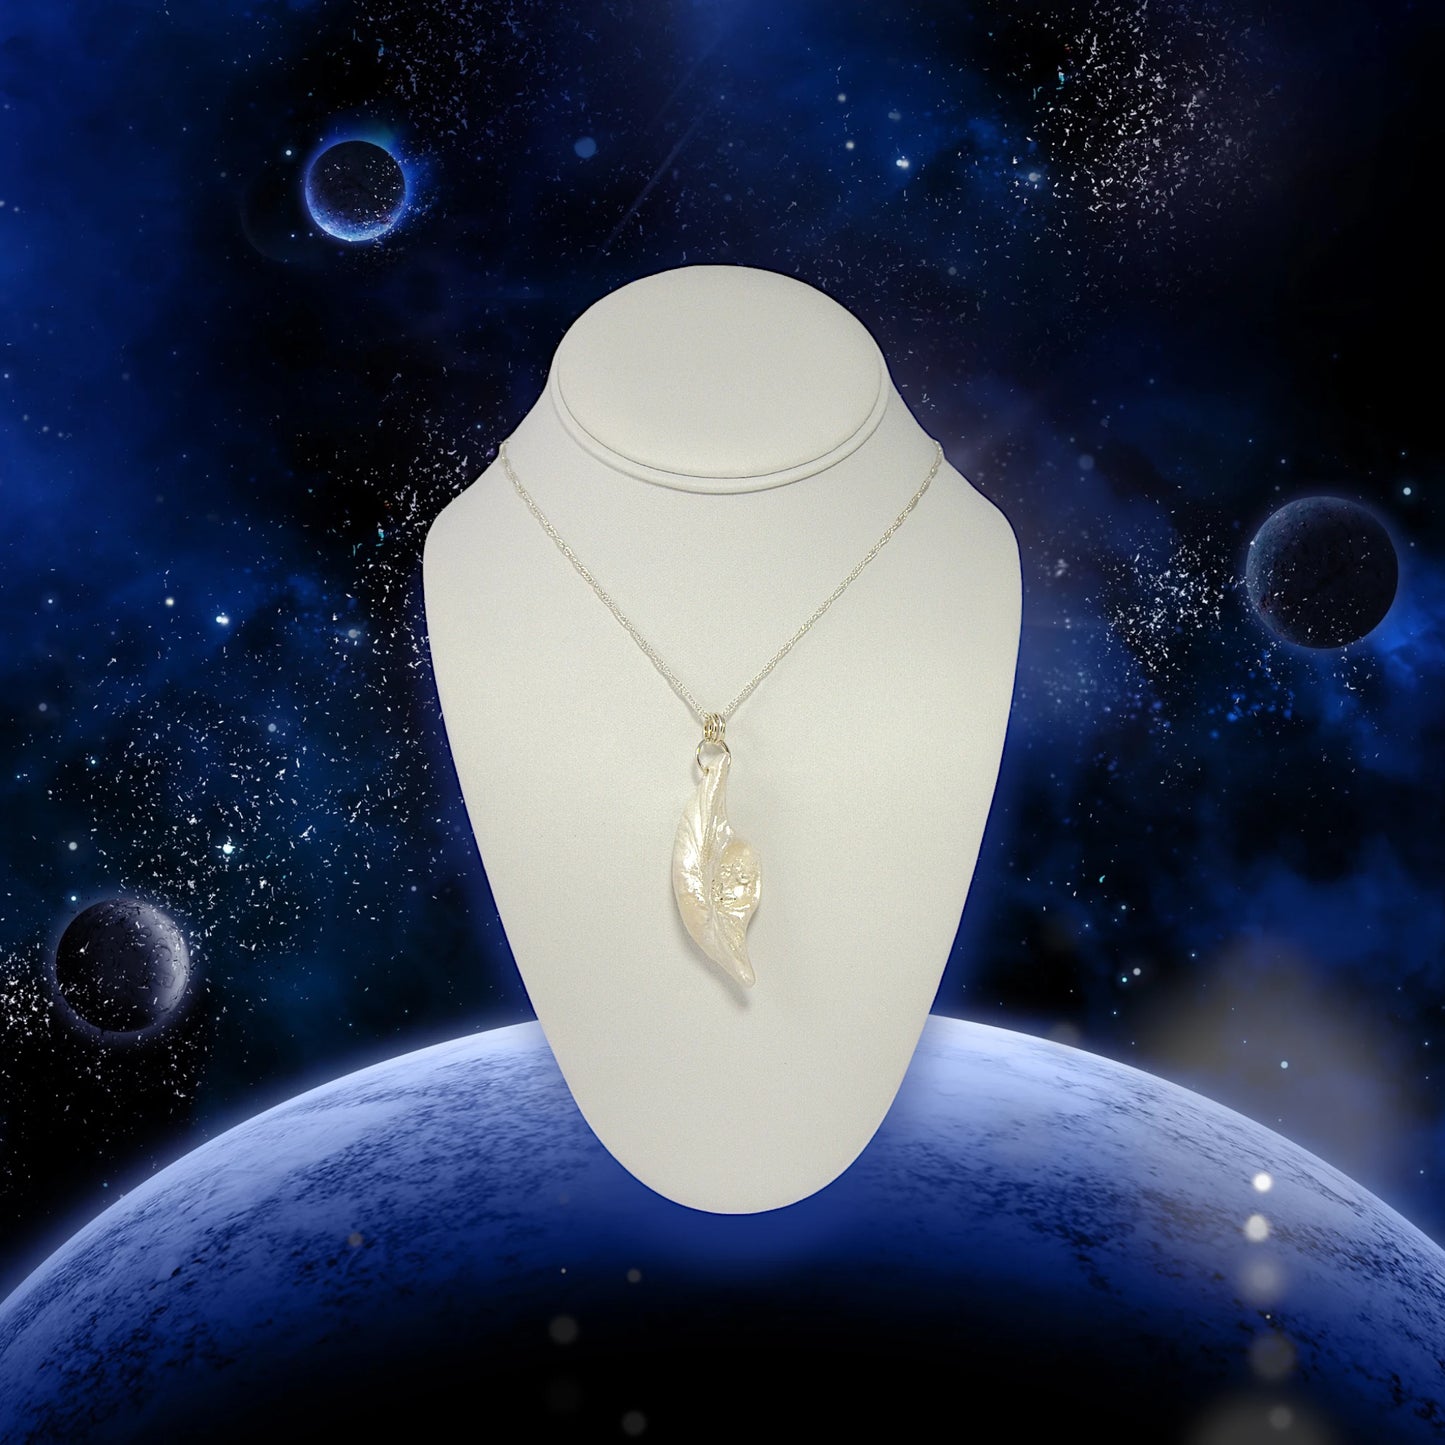 Beautiful pendant called Clarity.  Clarity is a natural seashell from the beach of Vancouver island.with seven herkimer diamonds. The pendant is shown on a white necklace displayer hanging from a chain.  The background is of outer space in blue with stars, moons, and planets.